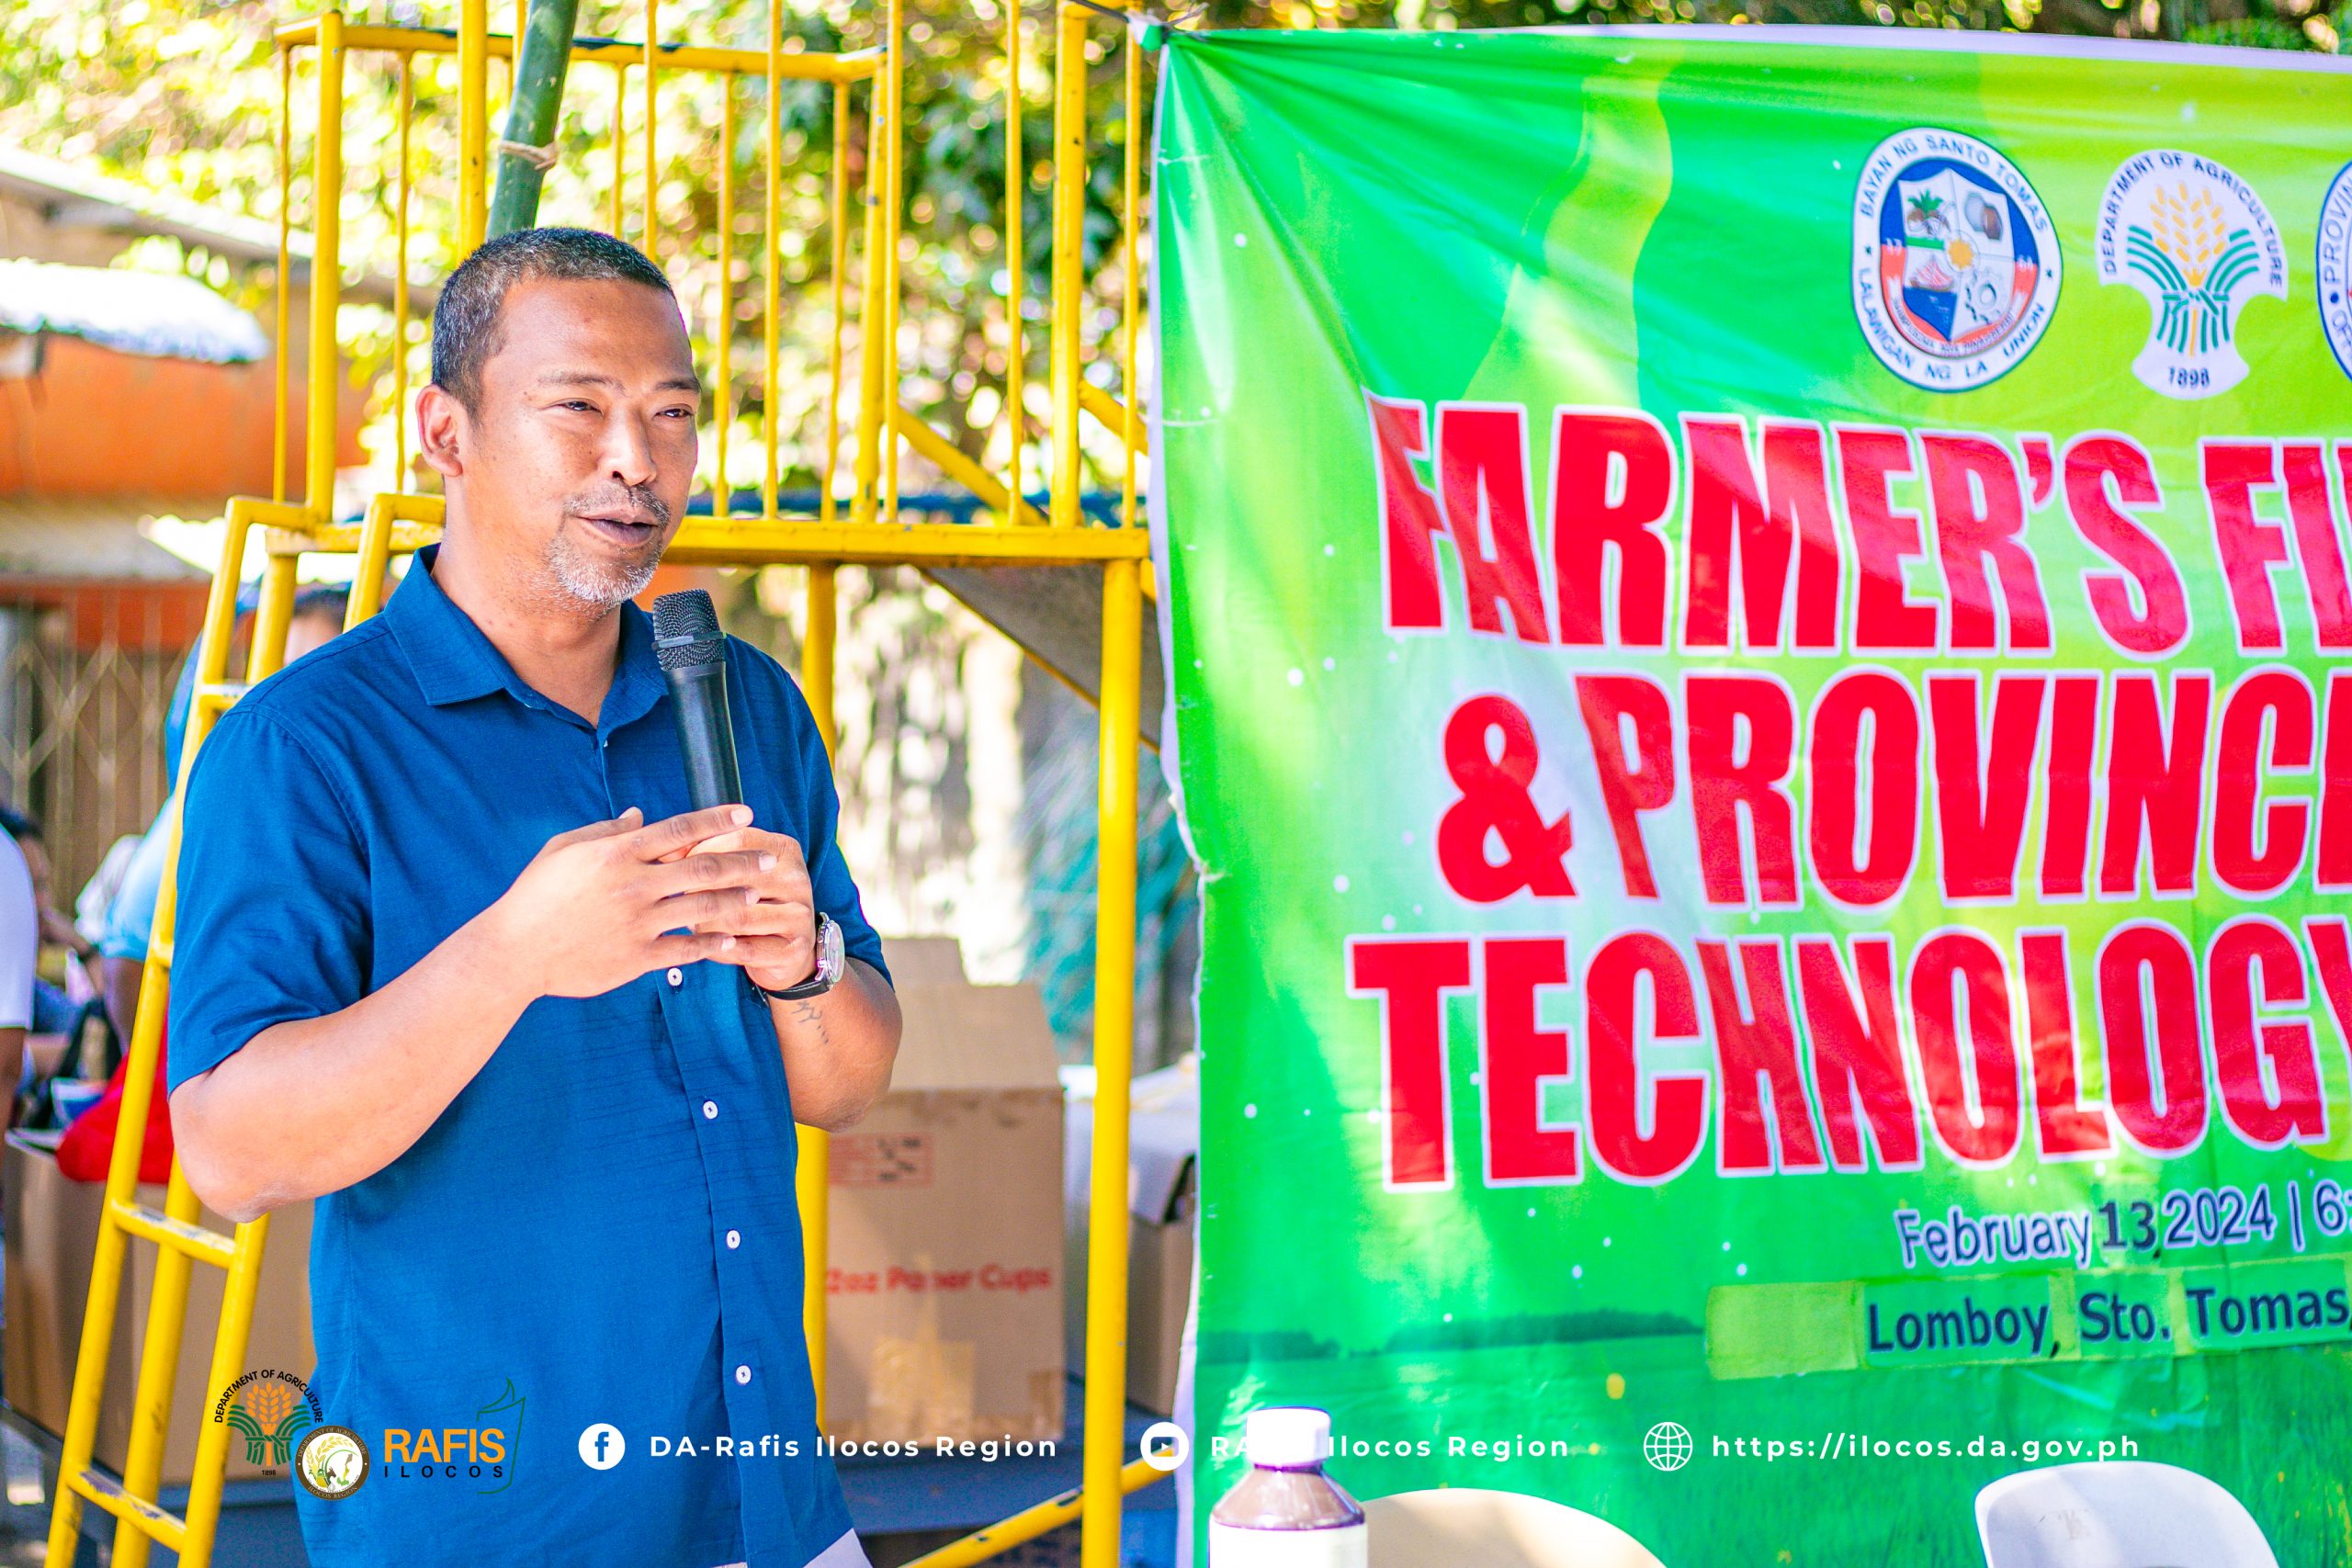 Around 100 farmers from the province of La Union gathered for a farmers’ field day and provincial rice technology forum in Lomboy, Sto. Tomas, La Union on February 13th.